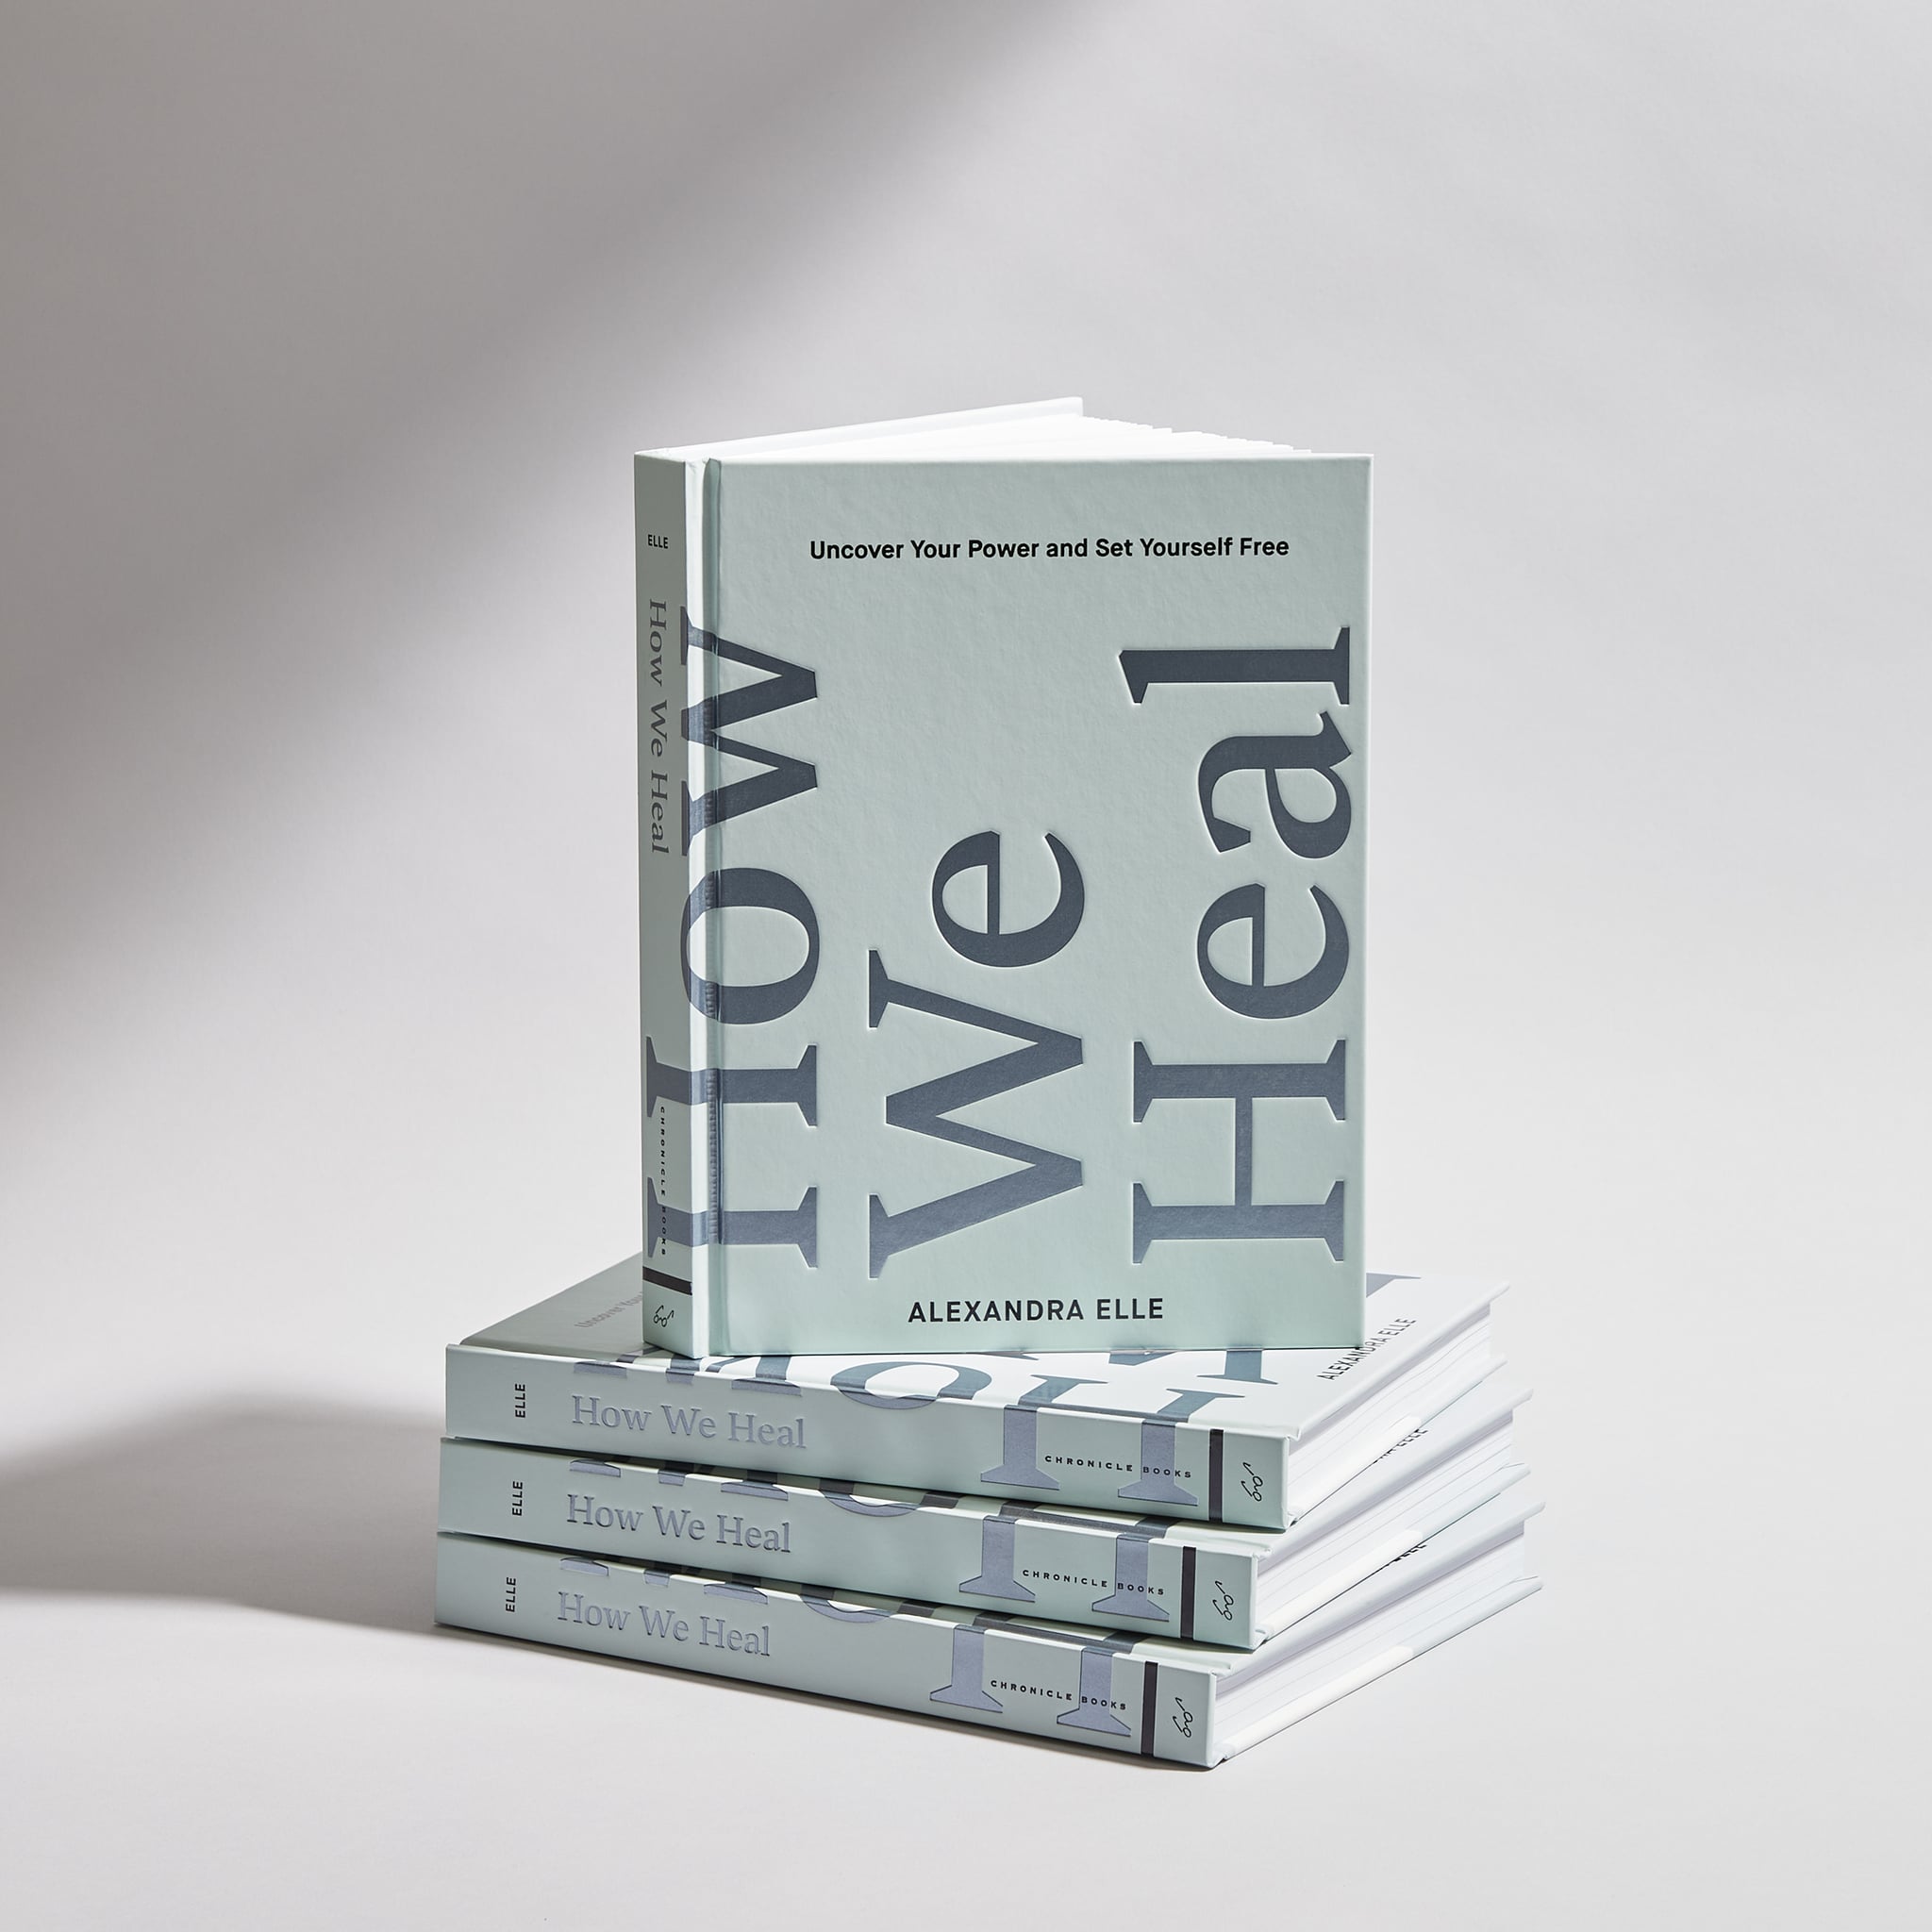 “How We Heal” Asks Readers to Embrace the Power of Positive Self-Talk